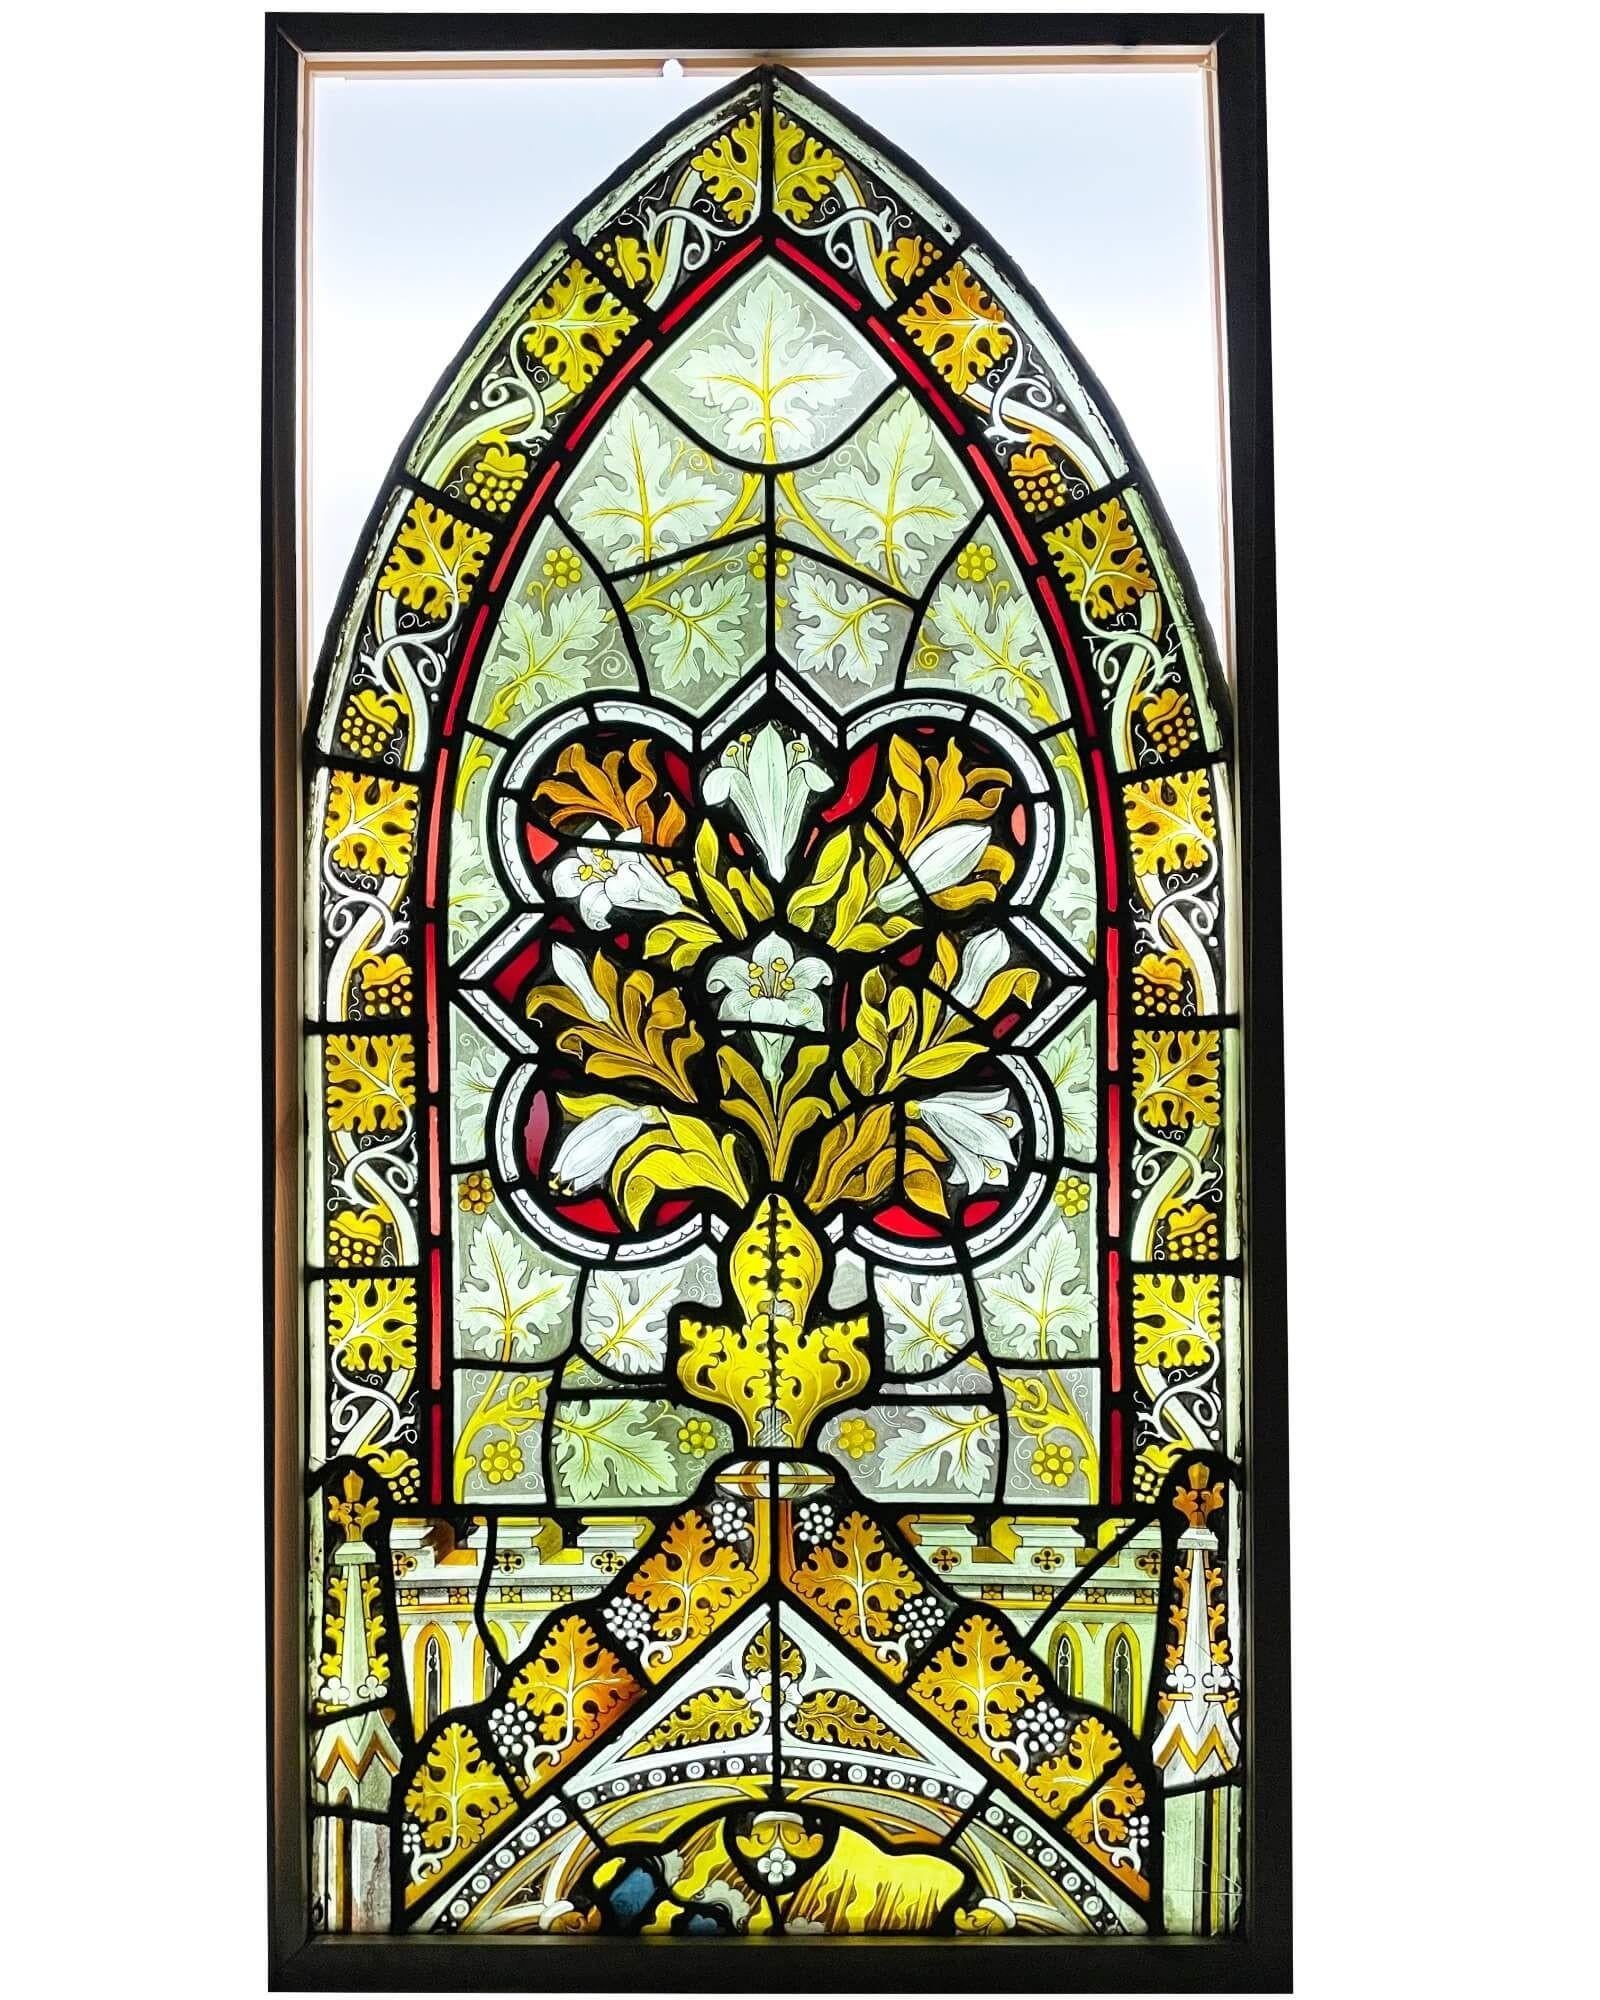 A 19th century Victorian ecclesiastical style arched window attributed to Ward & Hughes, London. This English stained glass is of excellent artistry, each tiny detail hand painted with vibrant colours and character by its late 19th century